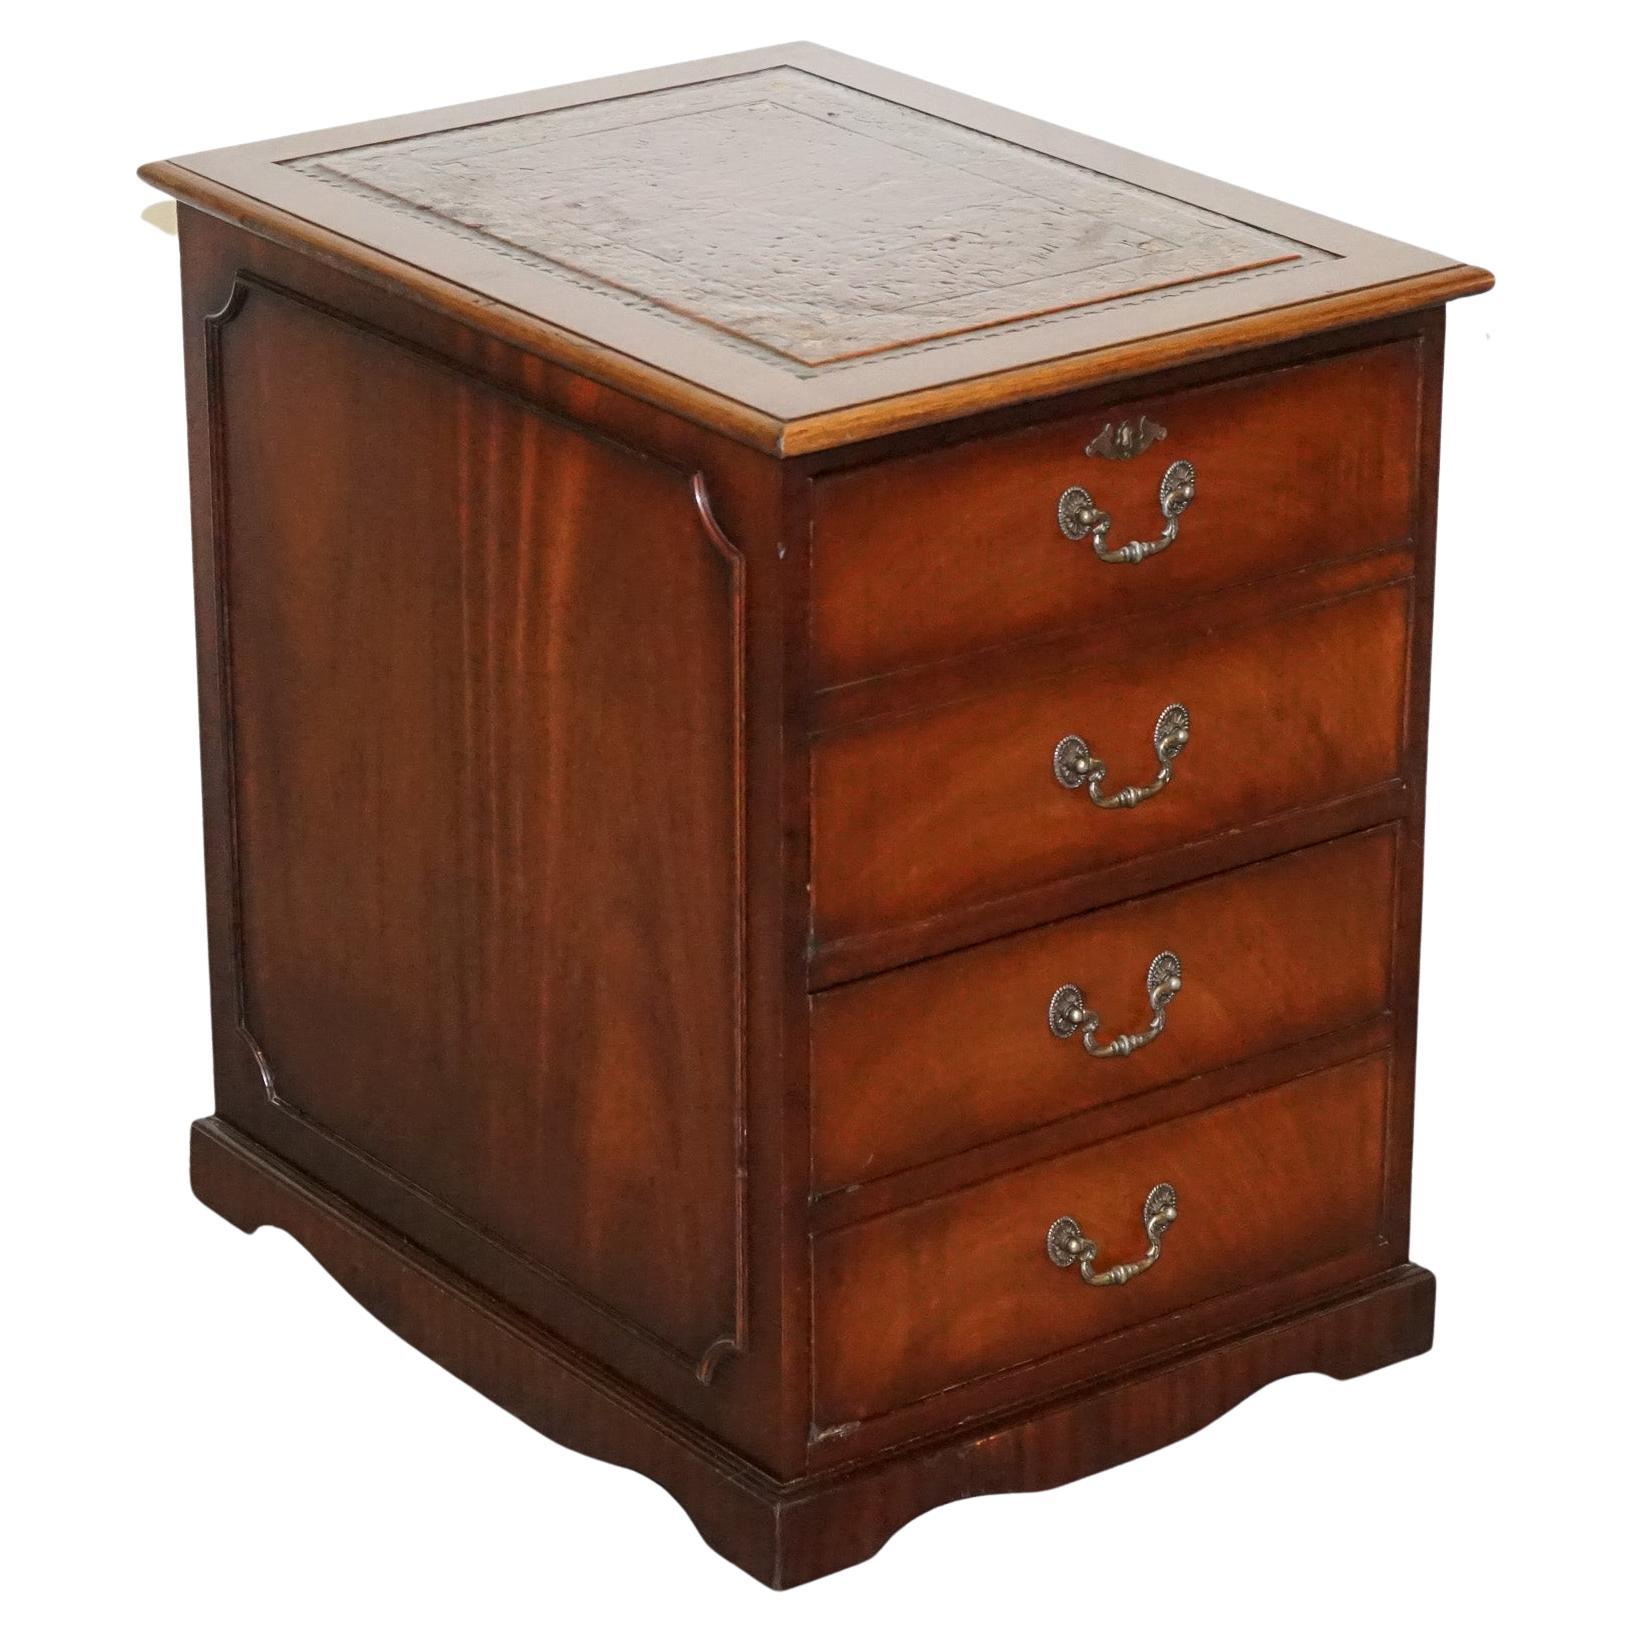 GOLD EMBOSSED BROWN LEATHER TOP FILLING CABiNET - MATCHING DESK AVAILABLE For Sale